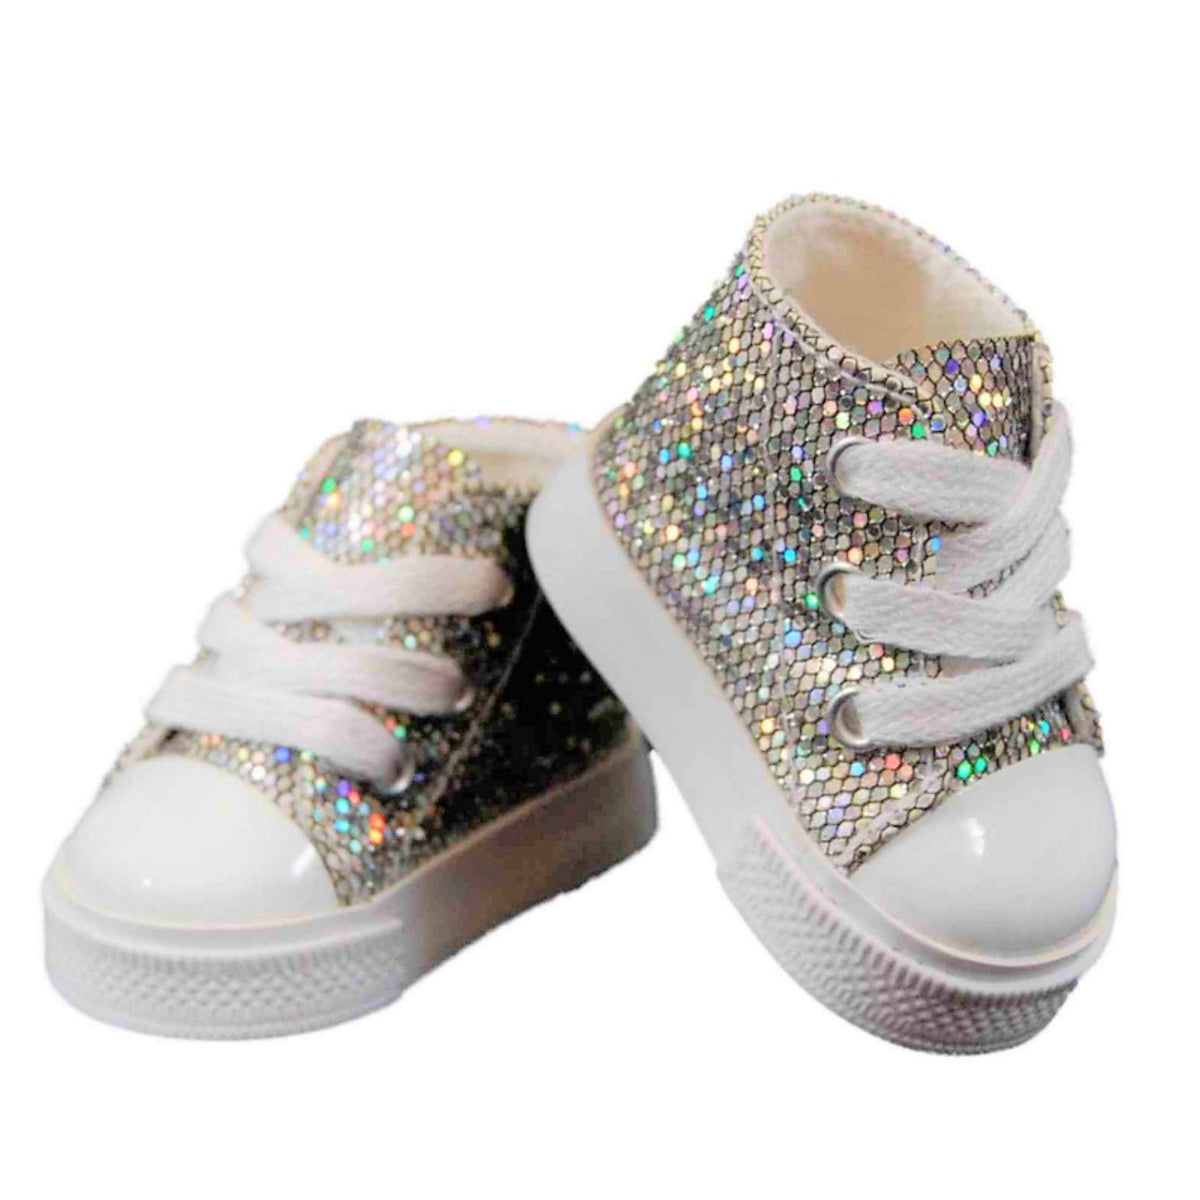 Queen's Treasures Sparkly Silver Sneakers and Shoe Box for 18" Dolls - Simon's Collectibles